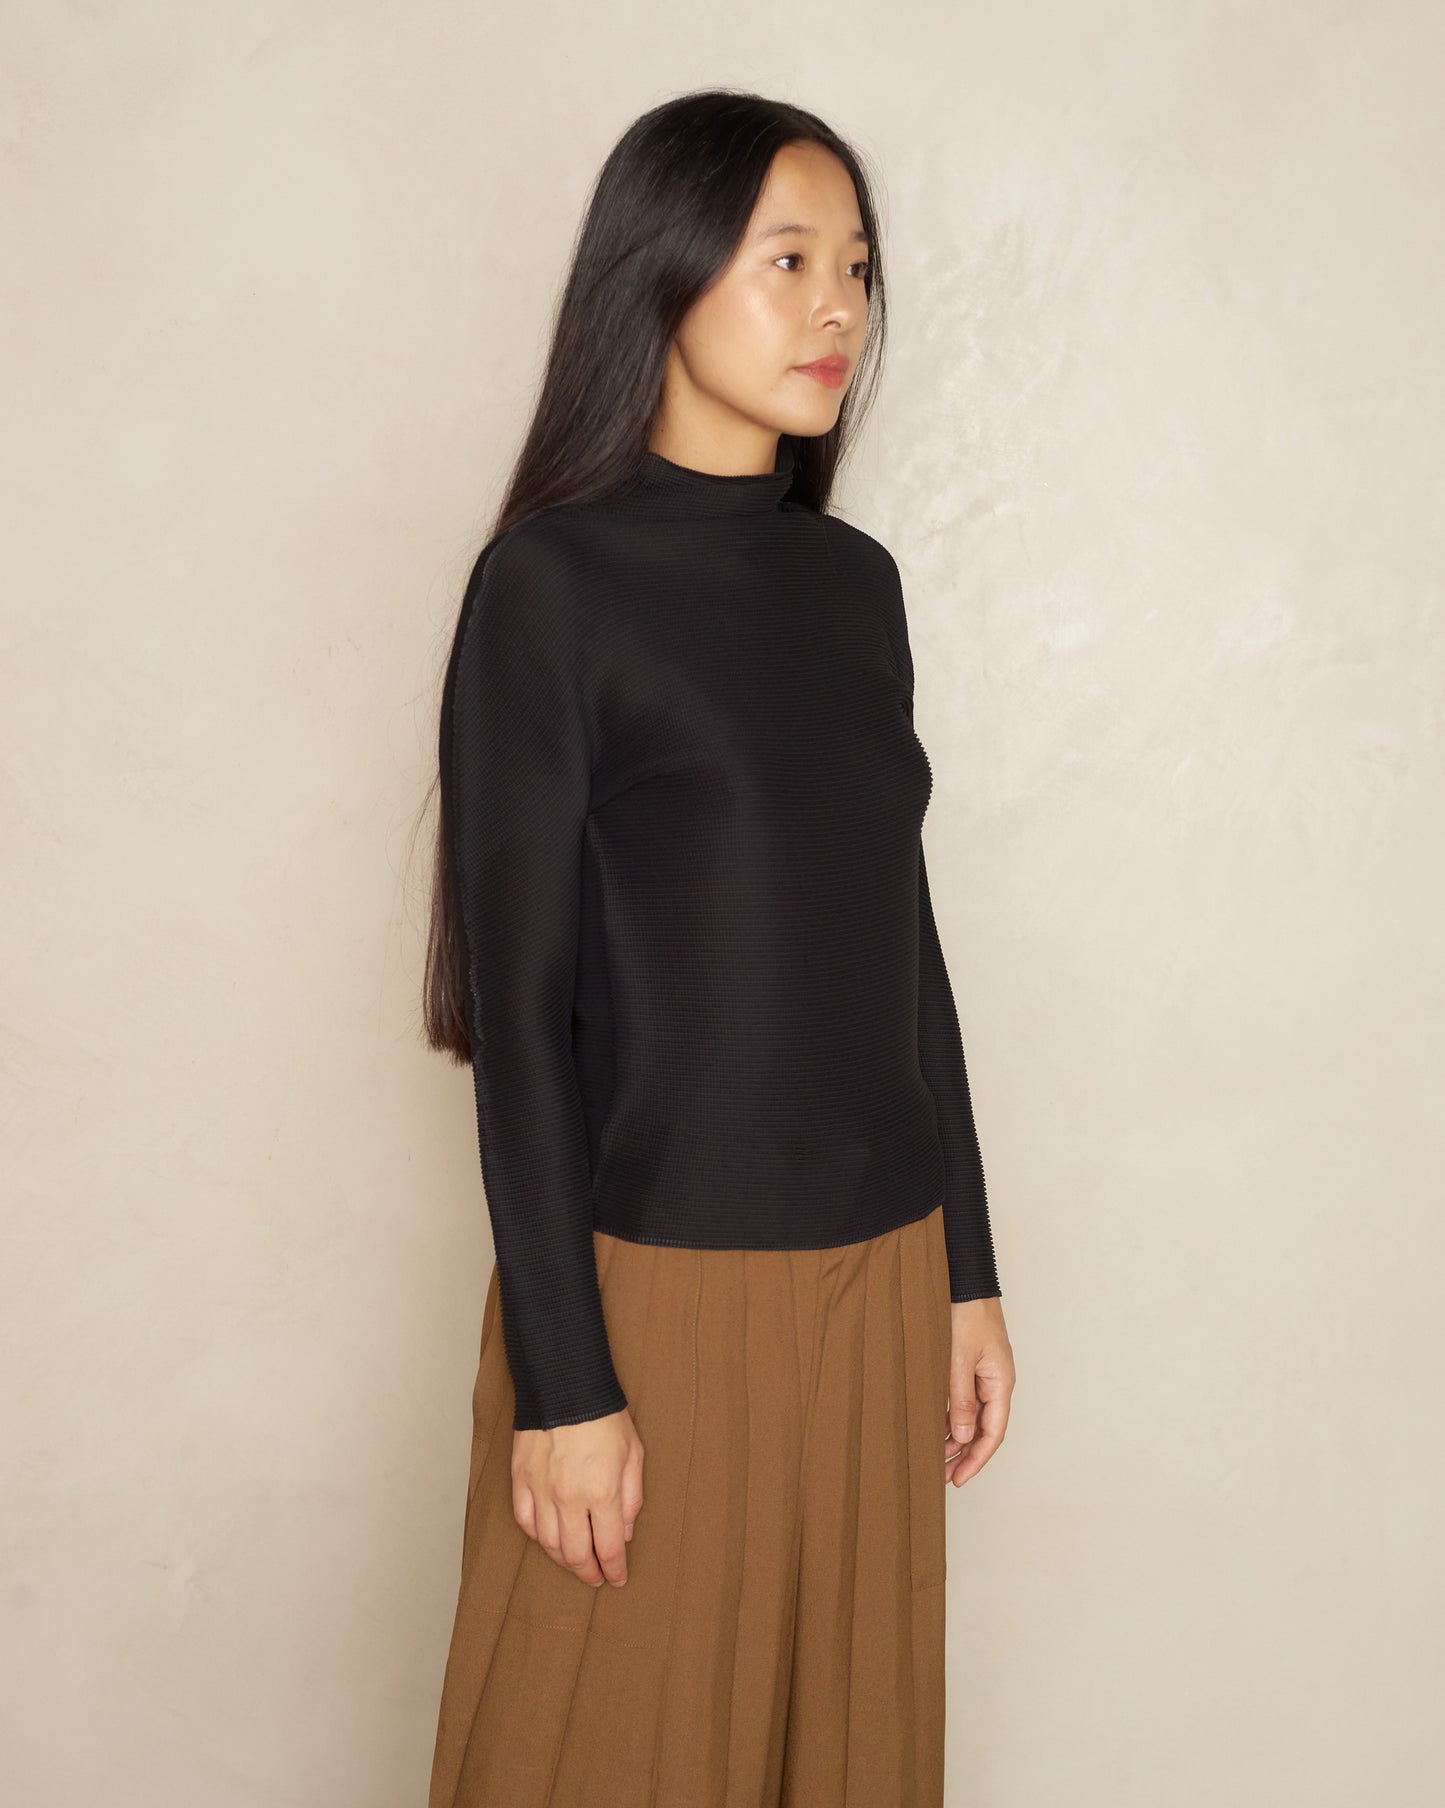 Black Micropleat High Neck Long Sleeve Top